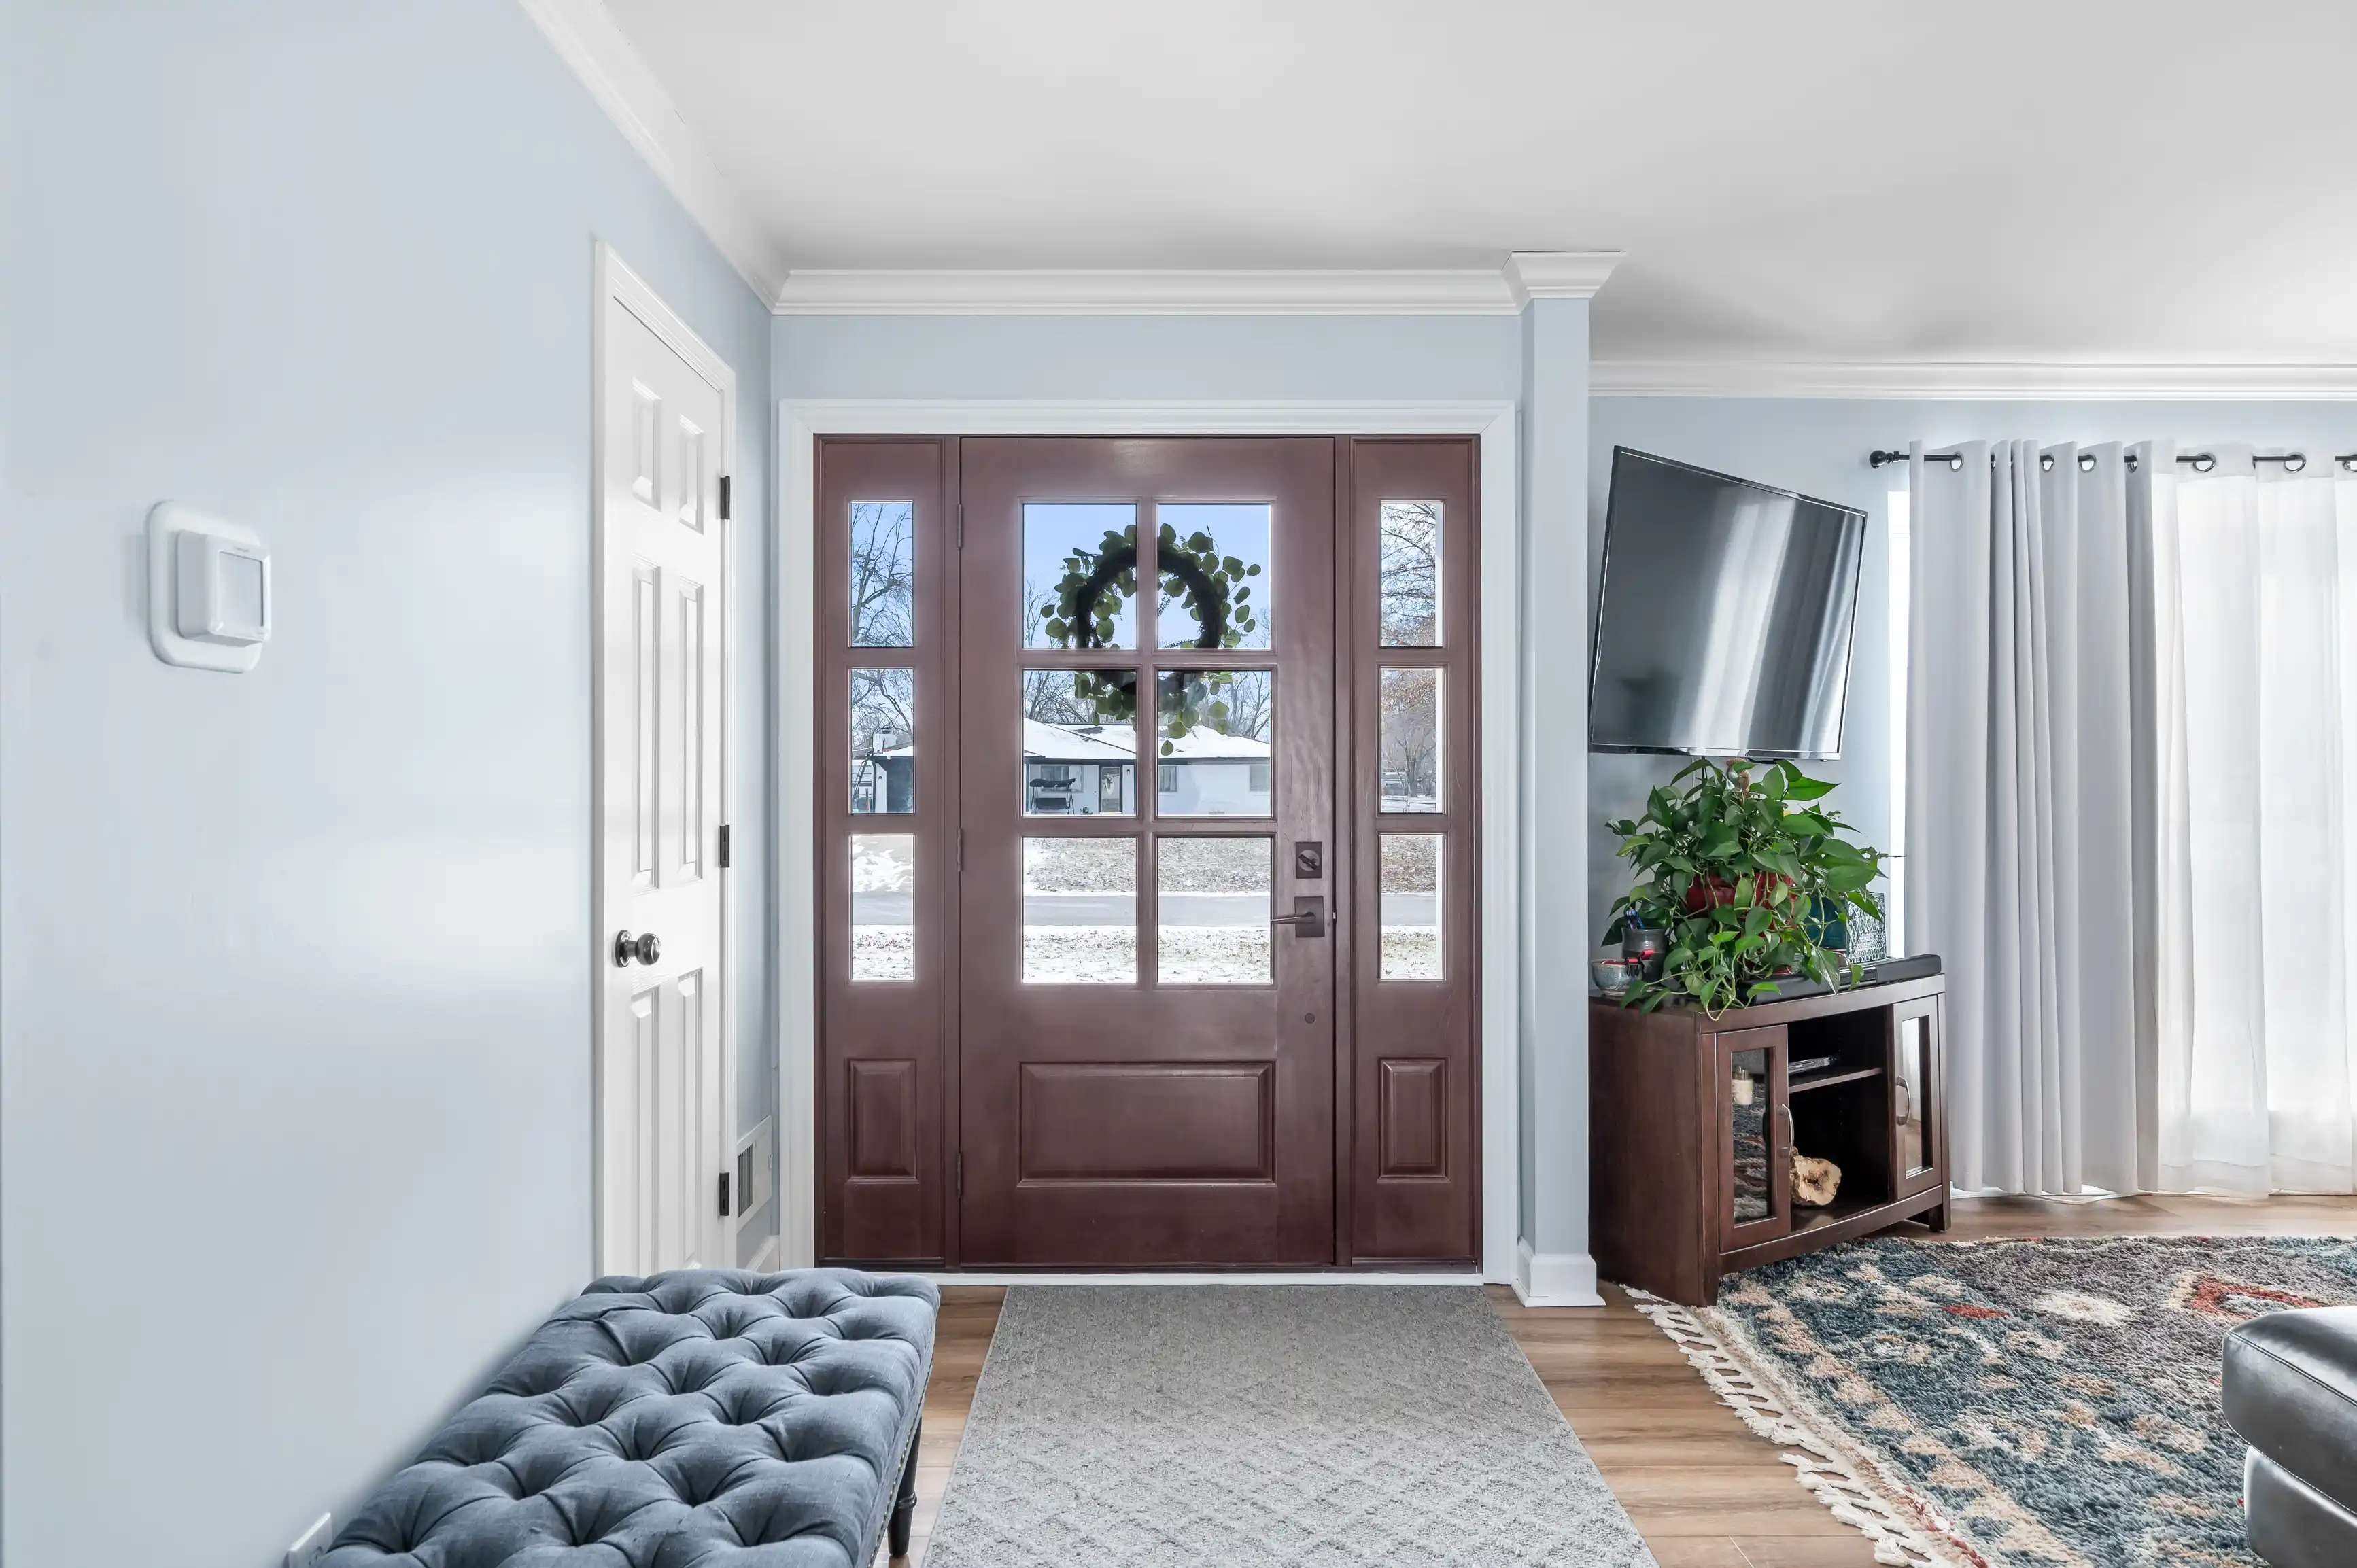 Bright entryway with a wooden front door flanked by sidelights, opening to a snow-covered exterior, with a tufted bench on one side and a television console with plants on the other.